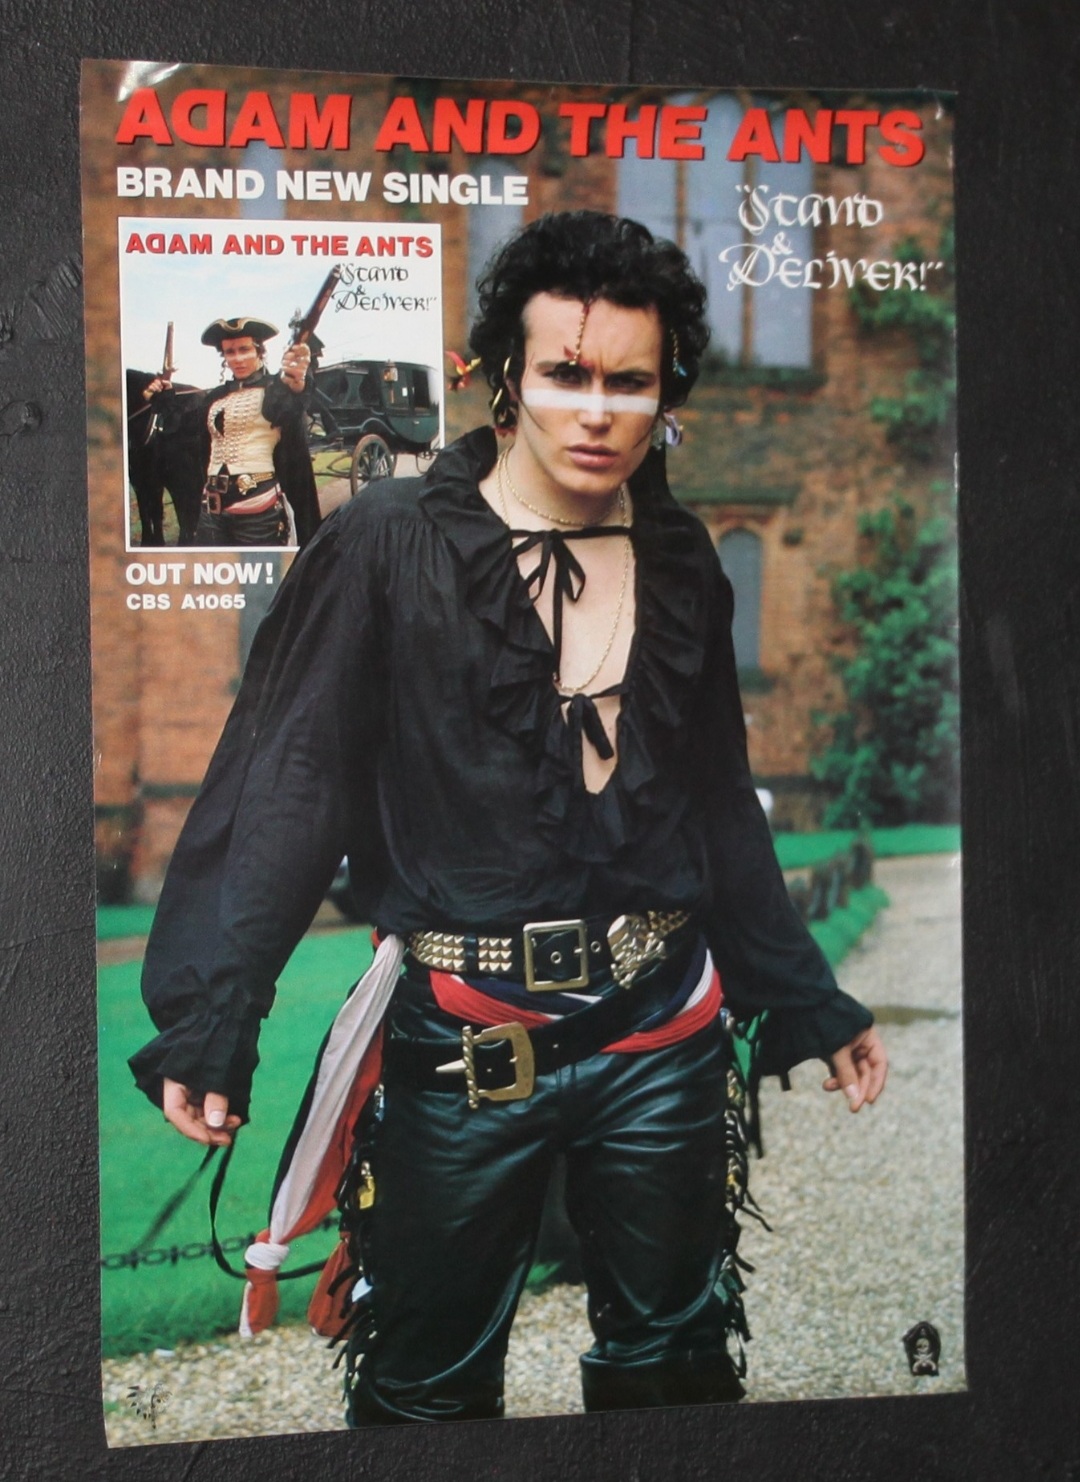 Adam Ant, Then and now | RPF Costume and Prop Maker Community